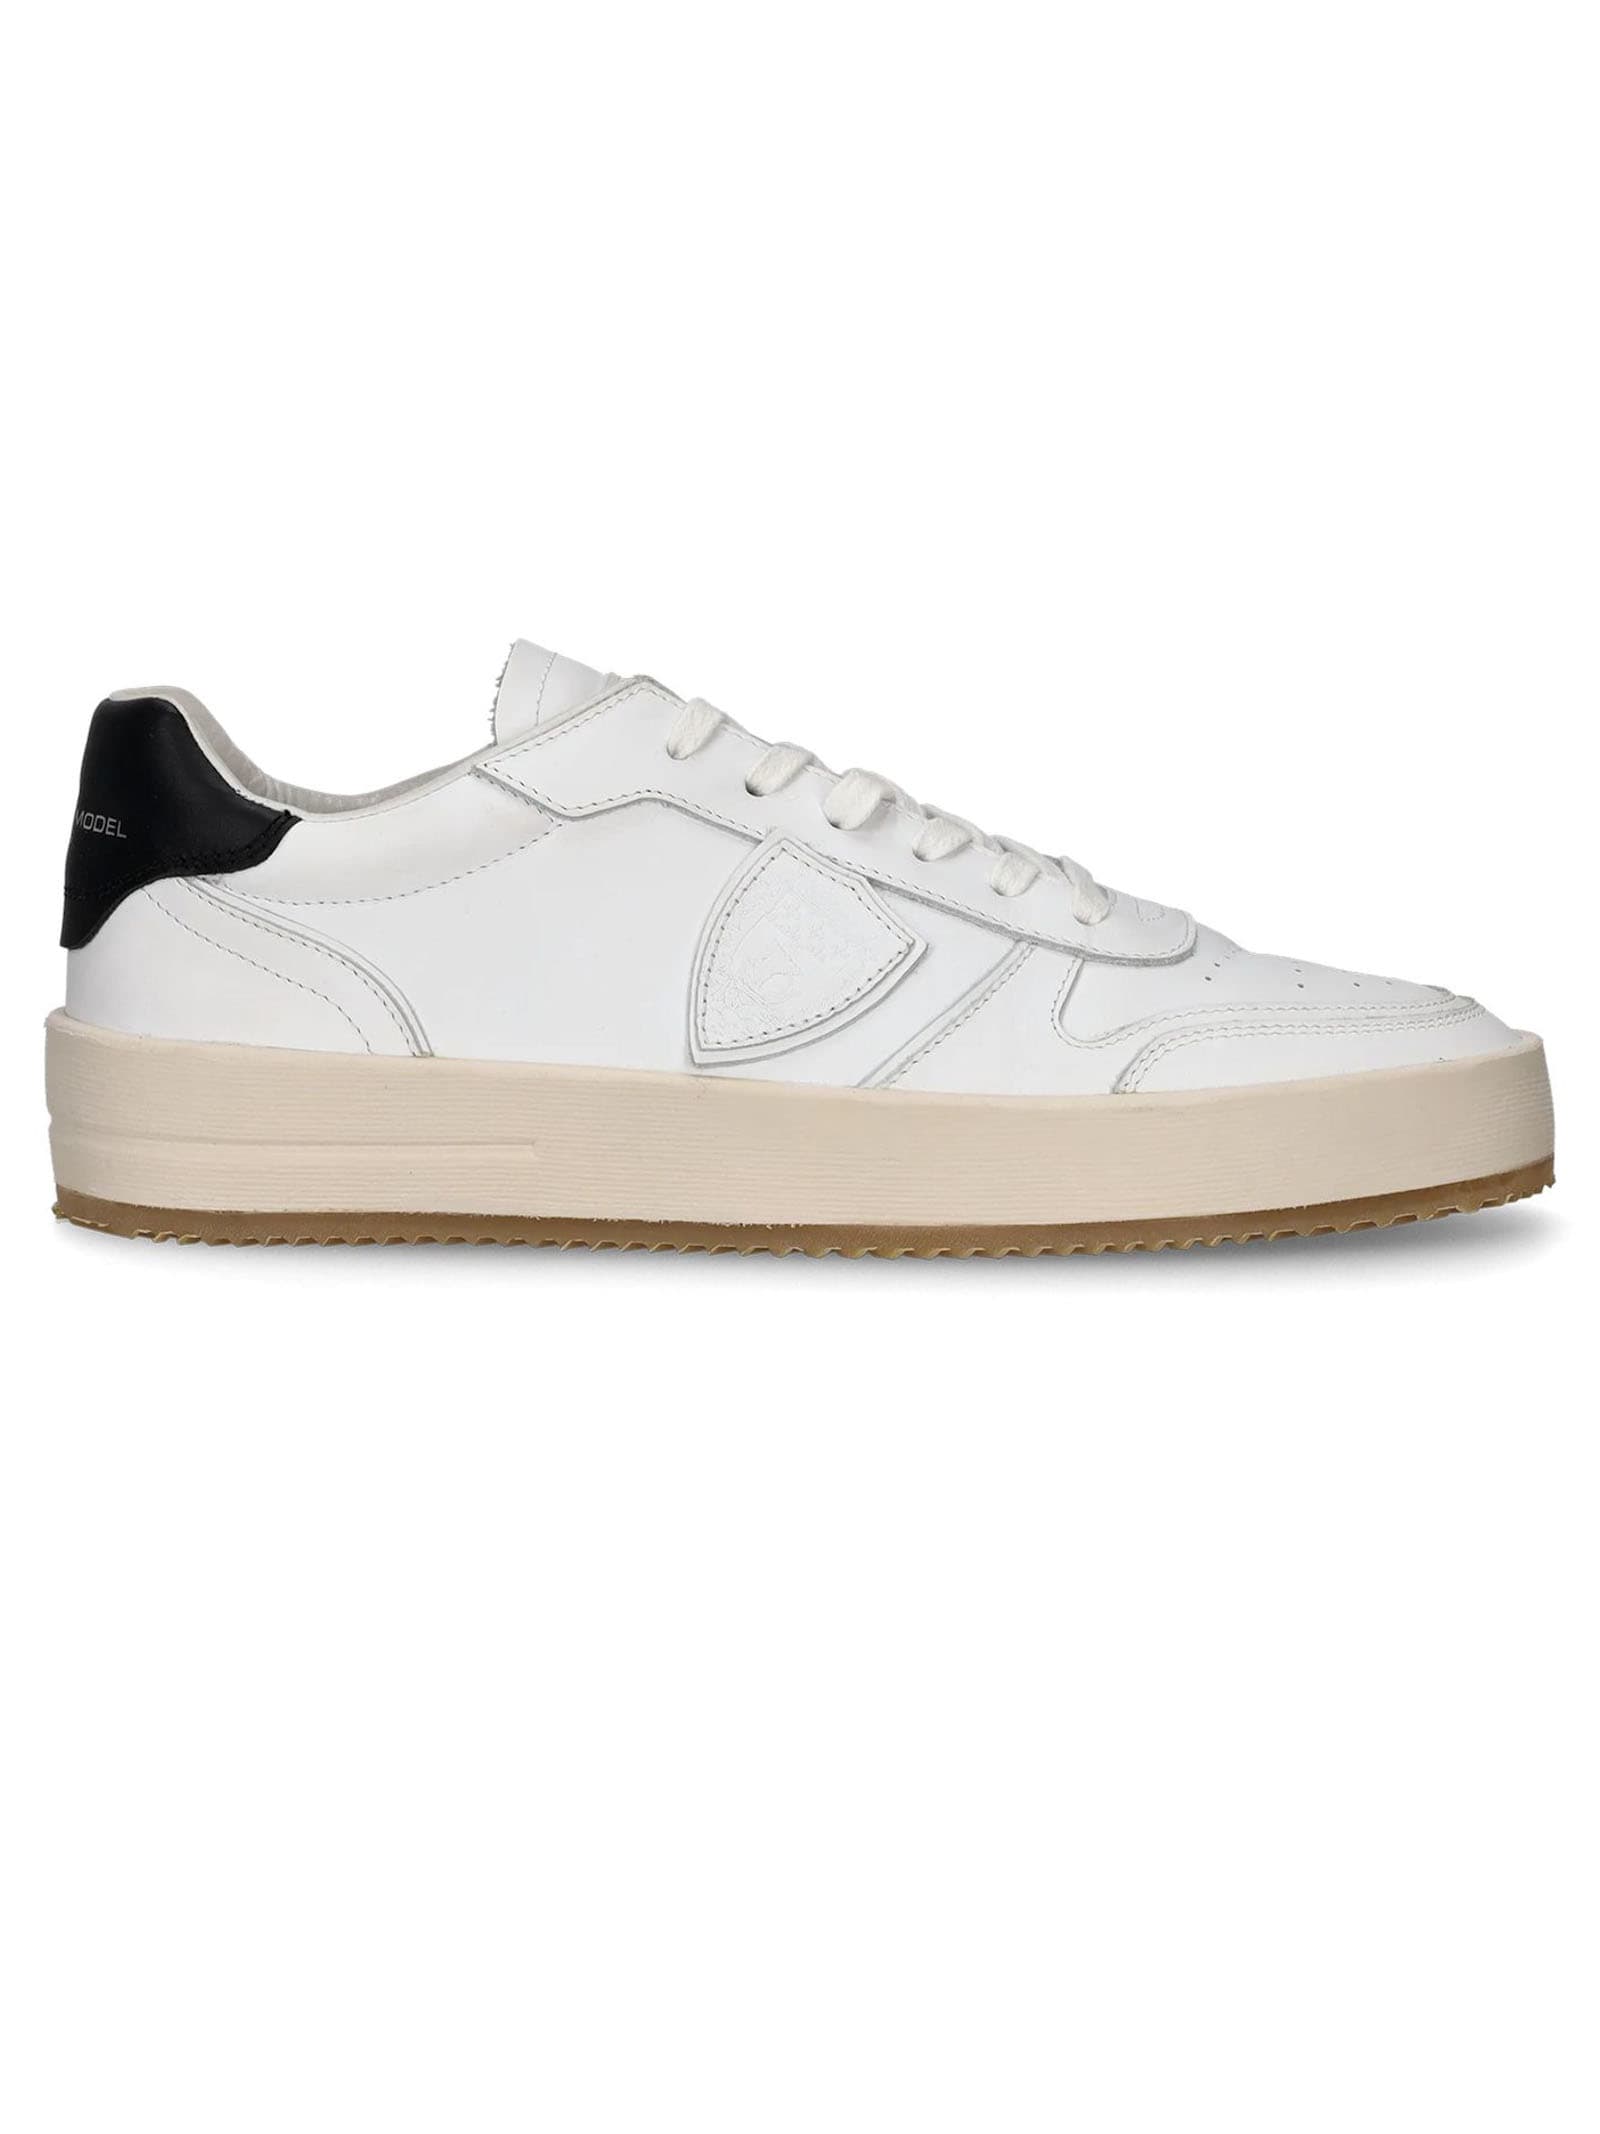 Nice Low-top Sneakers In Leather, White Black